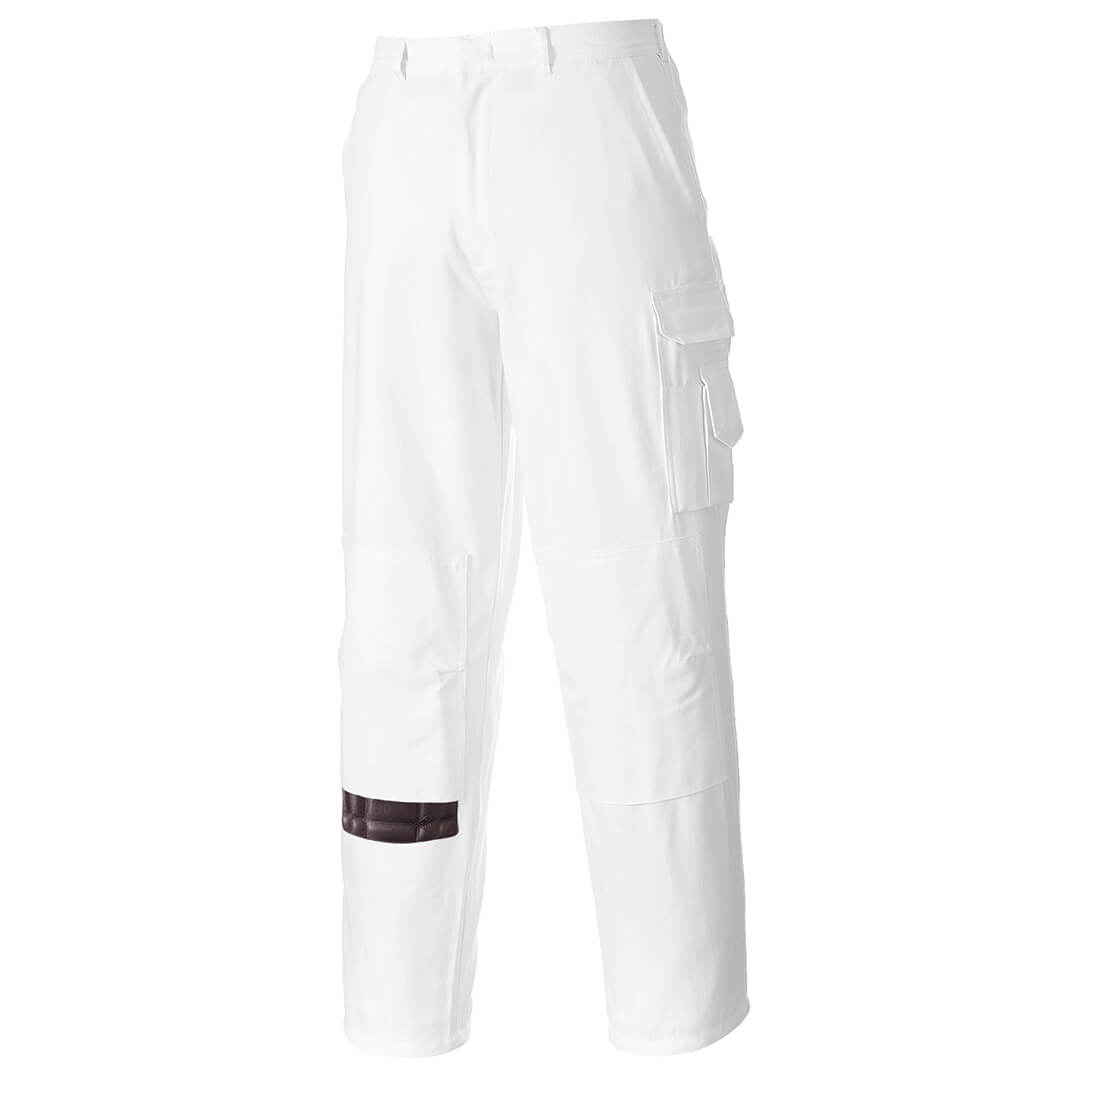 Image of Portwest Painters Trousers White XS 33"